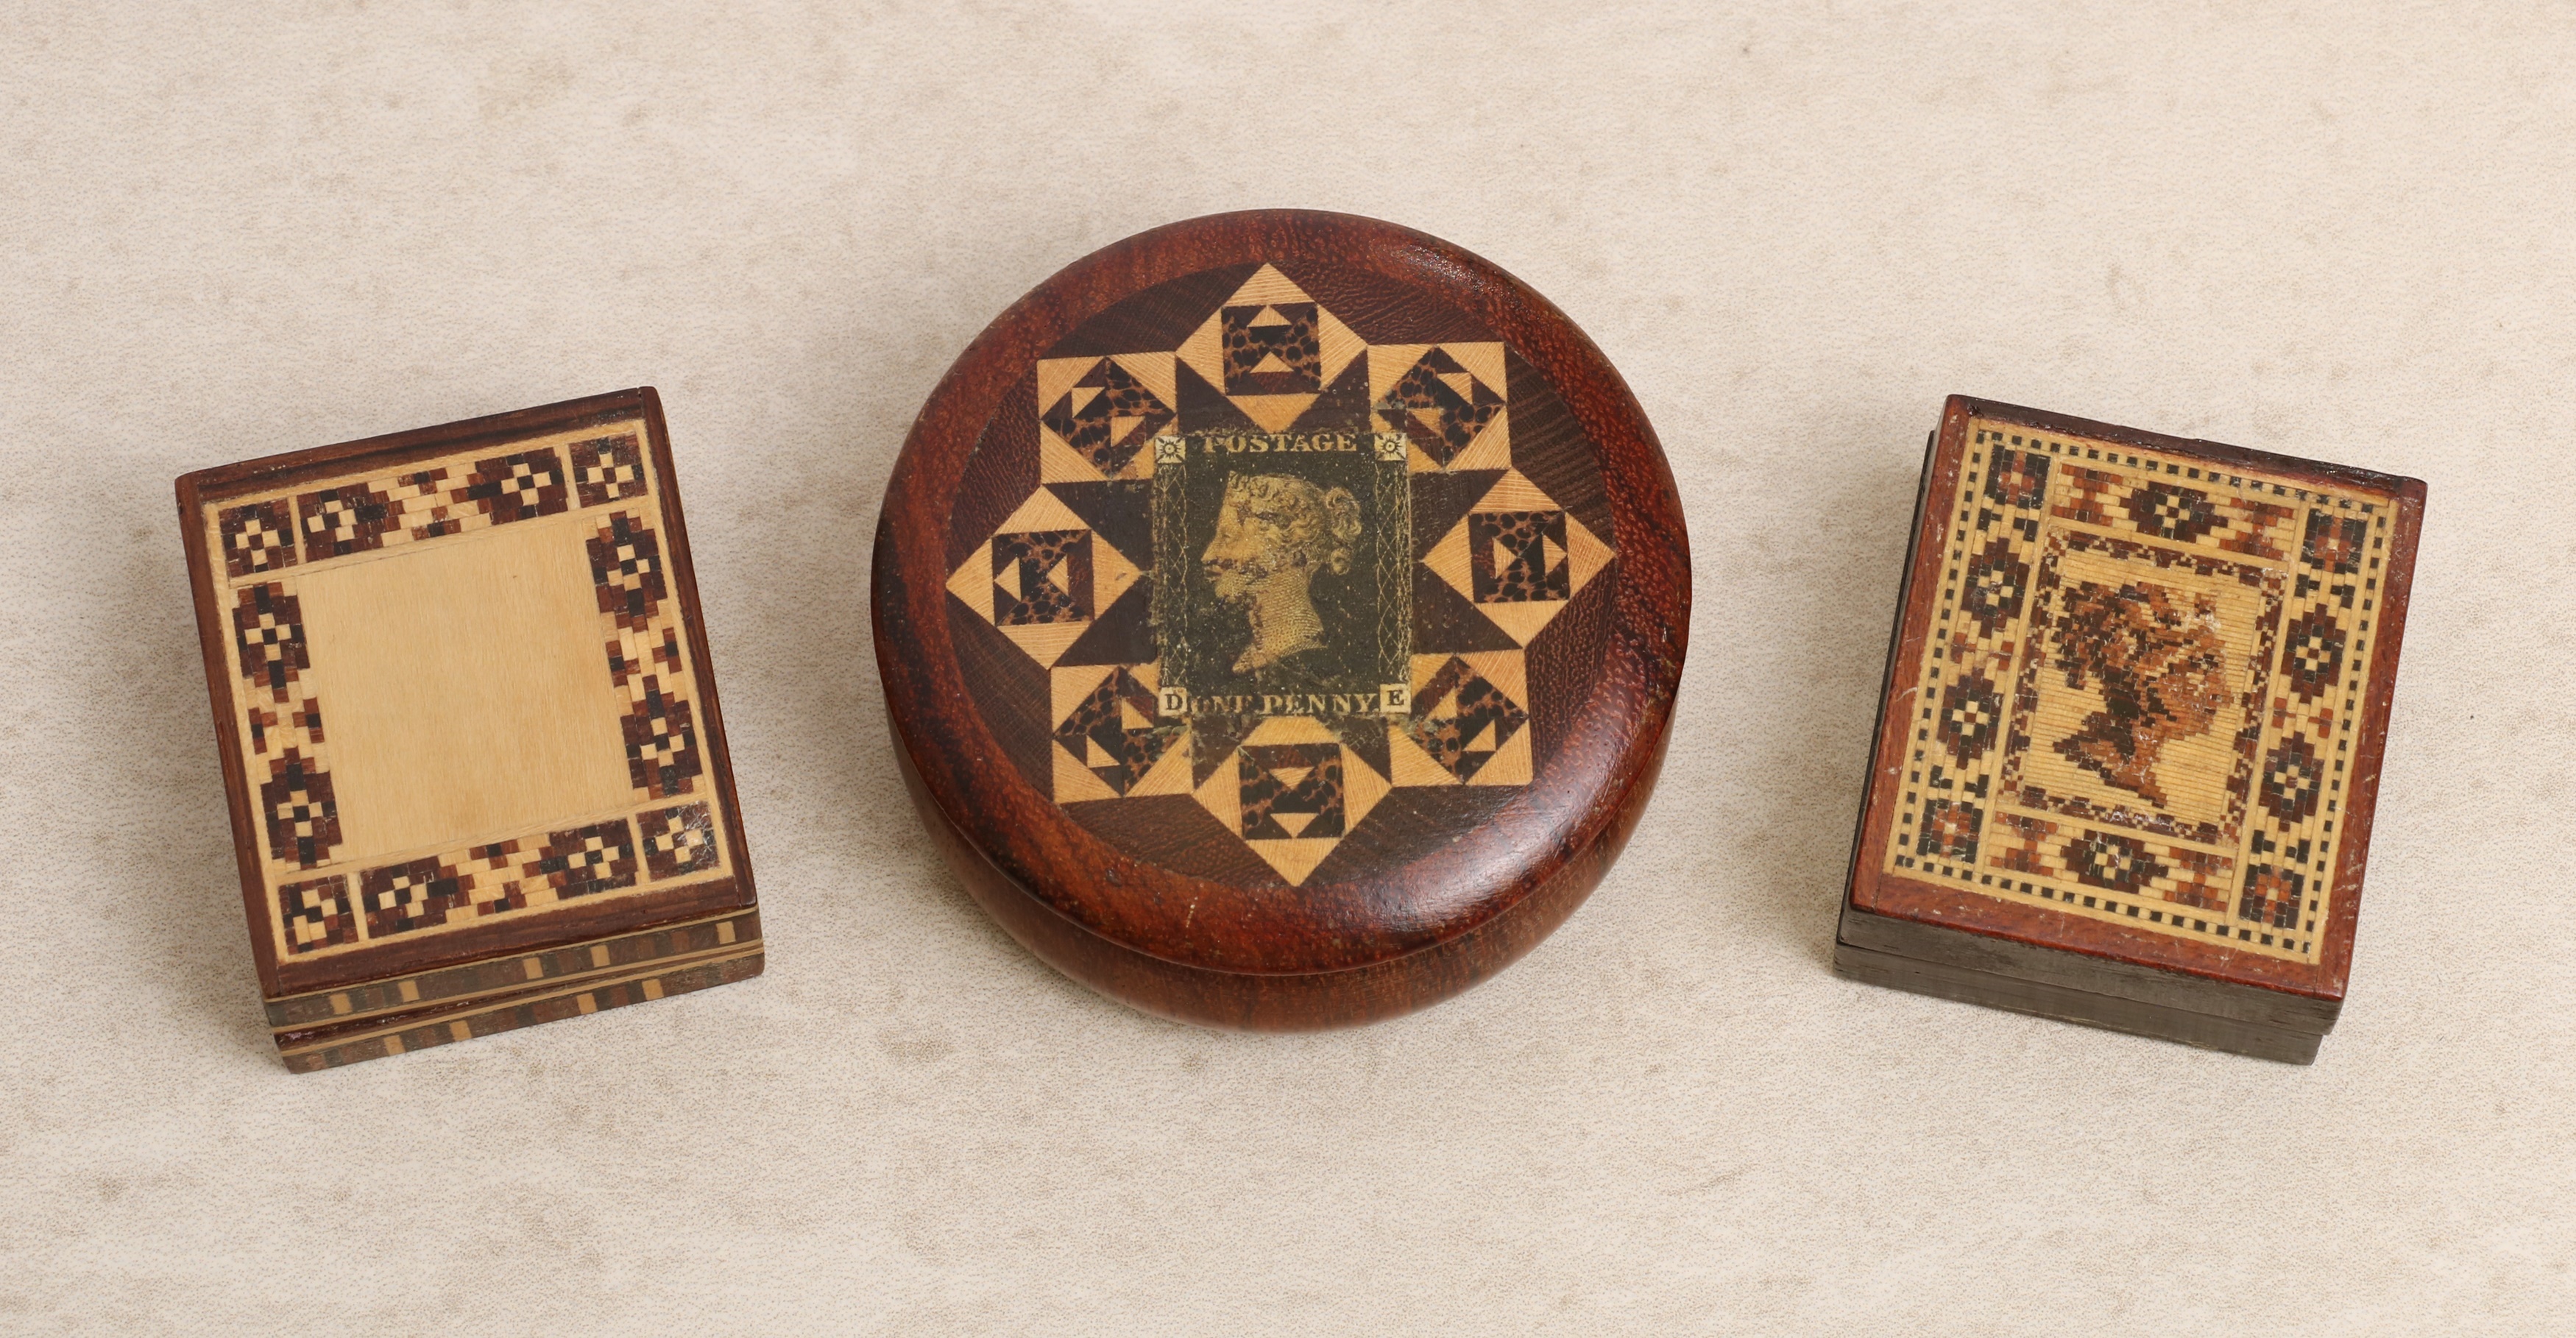 A group of three Tunbridge Ware stamp boxes (£150-250)